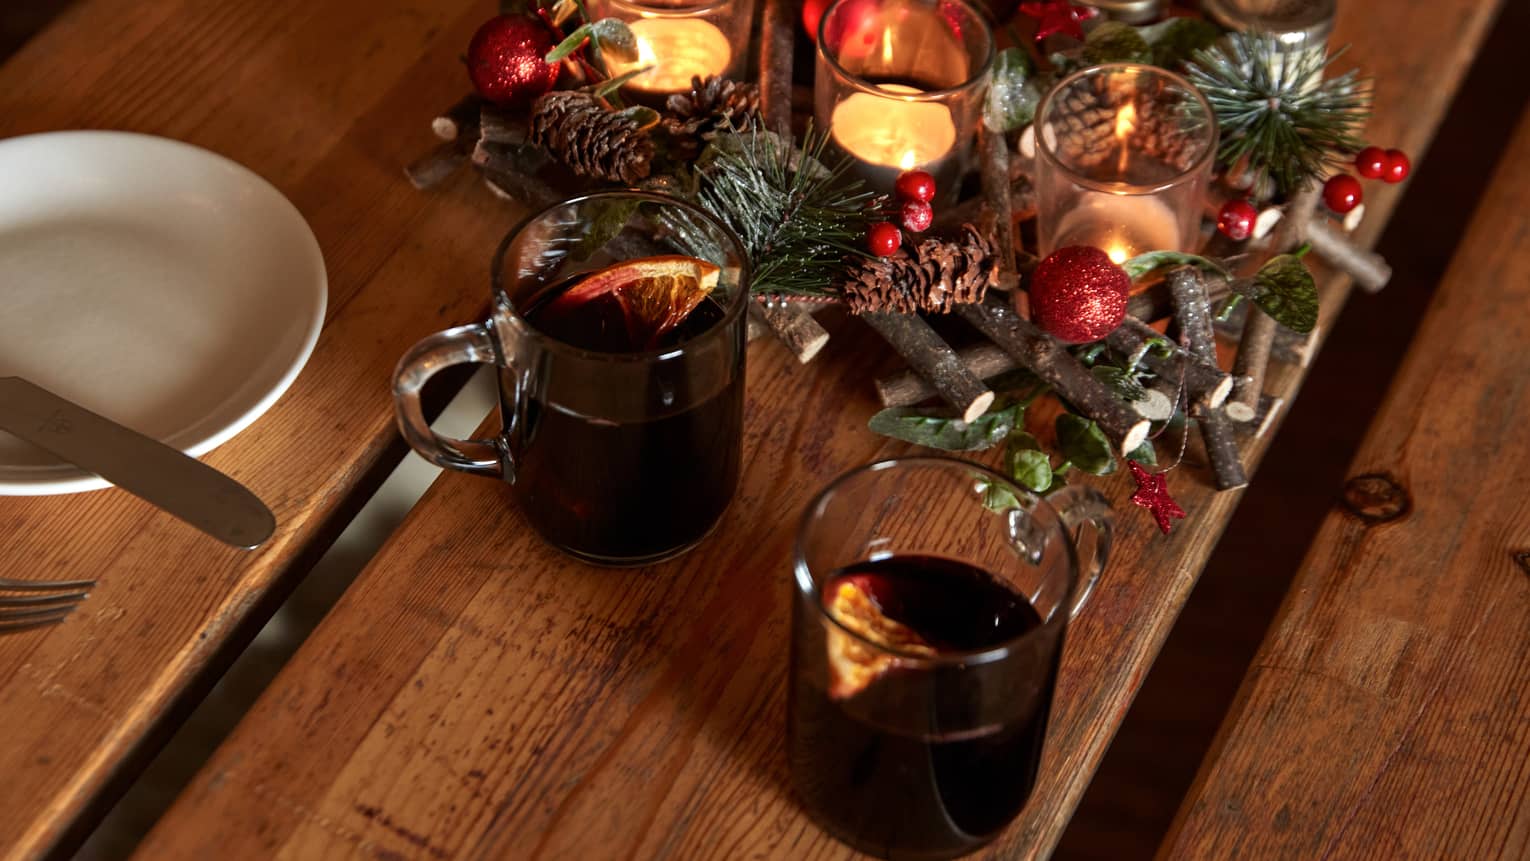 Beverages next to a festive table centerpiece with candles.